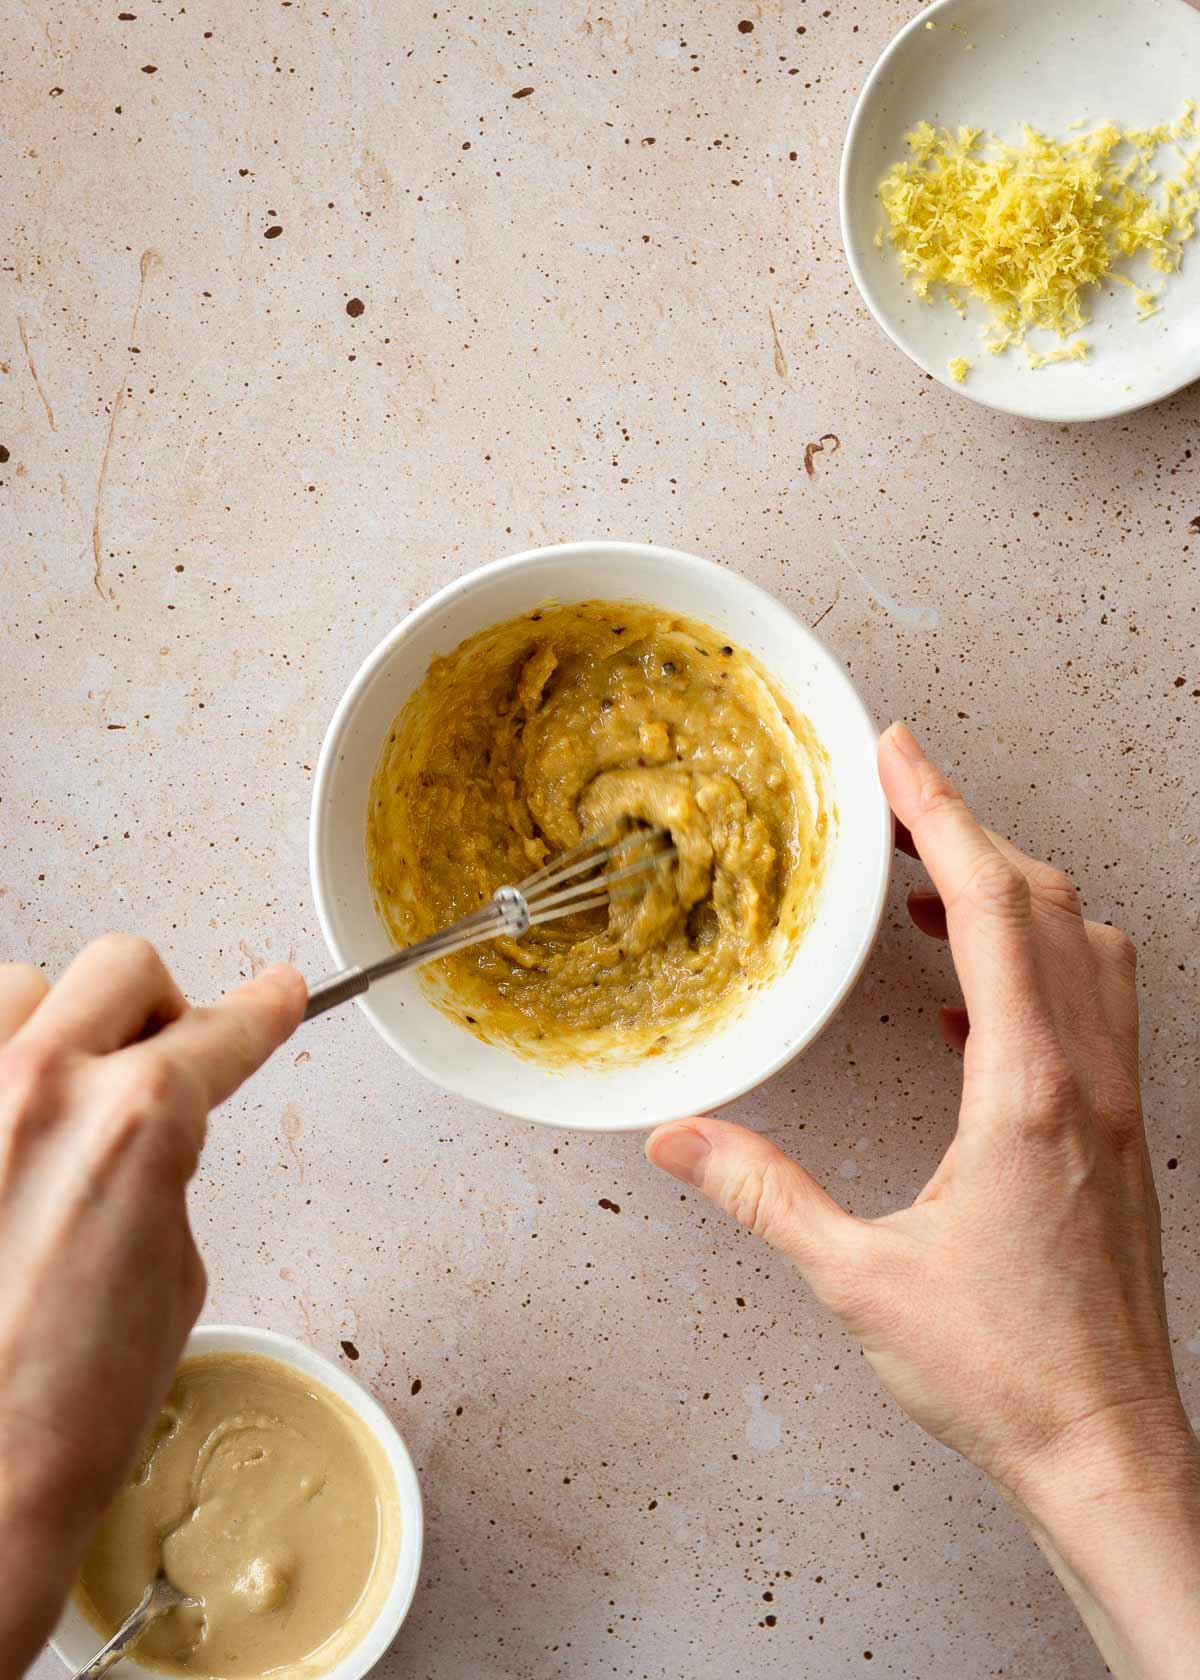 A woman's hands whisk a small bowl of tahini sauce, with dishes of tahini and lemon zest nearby.